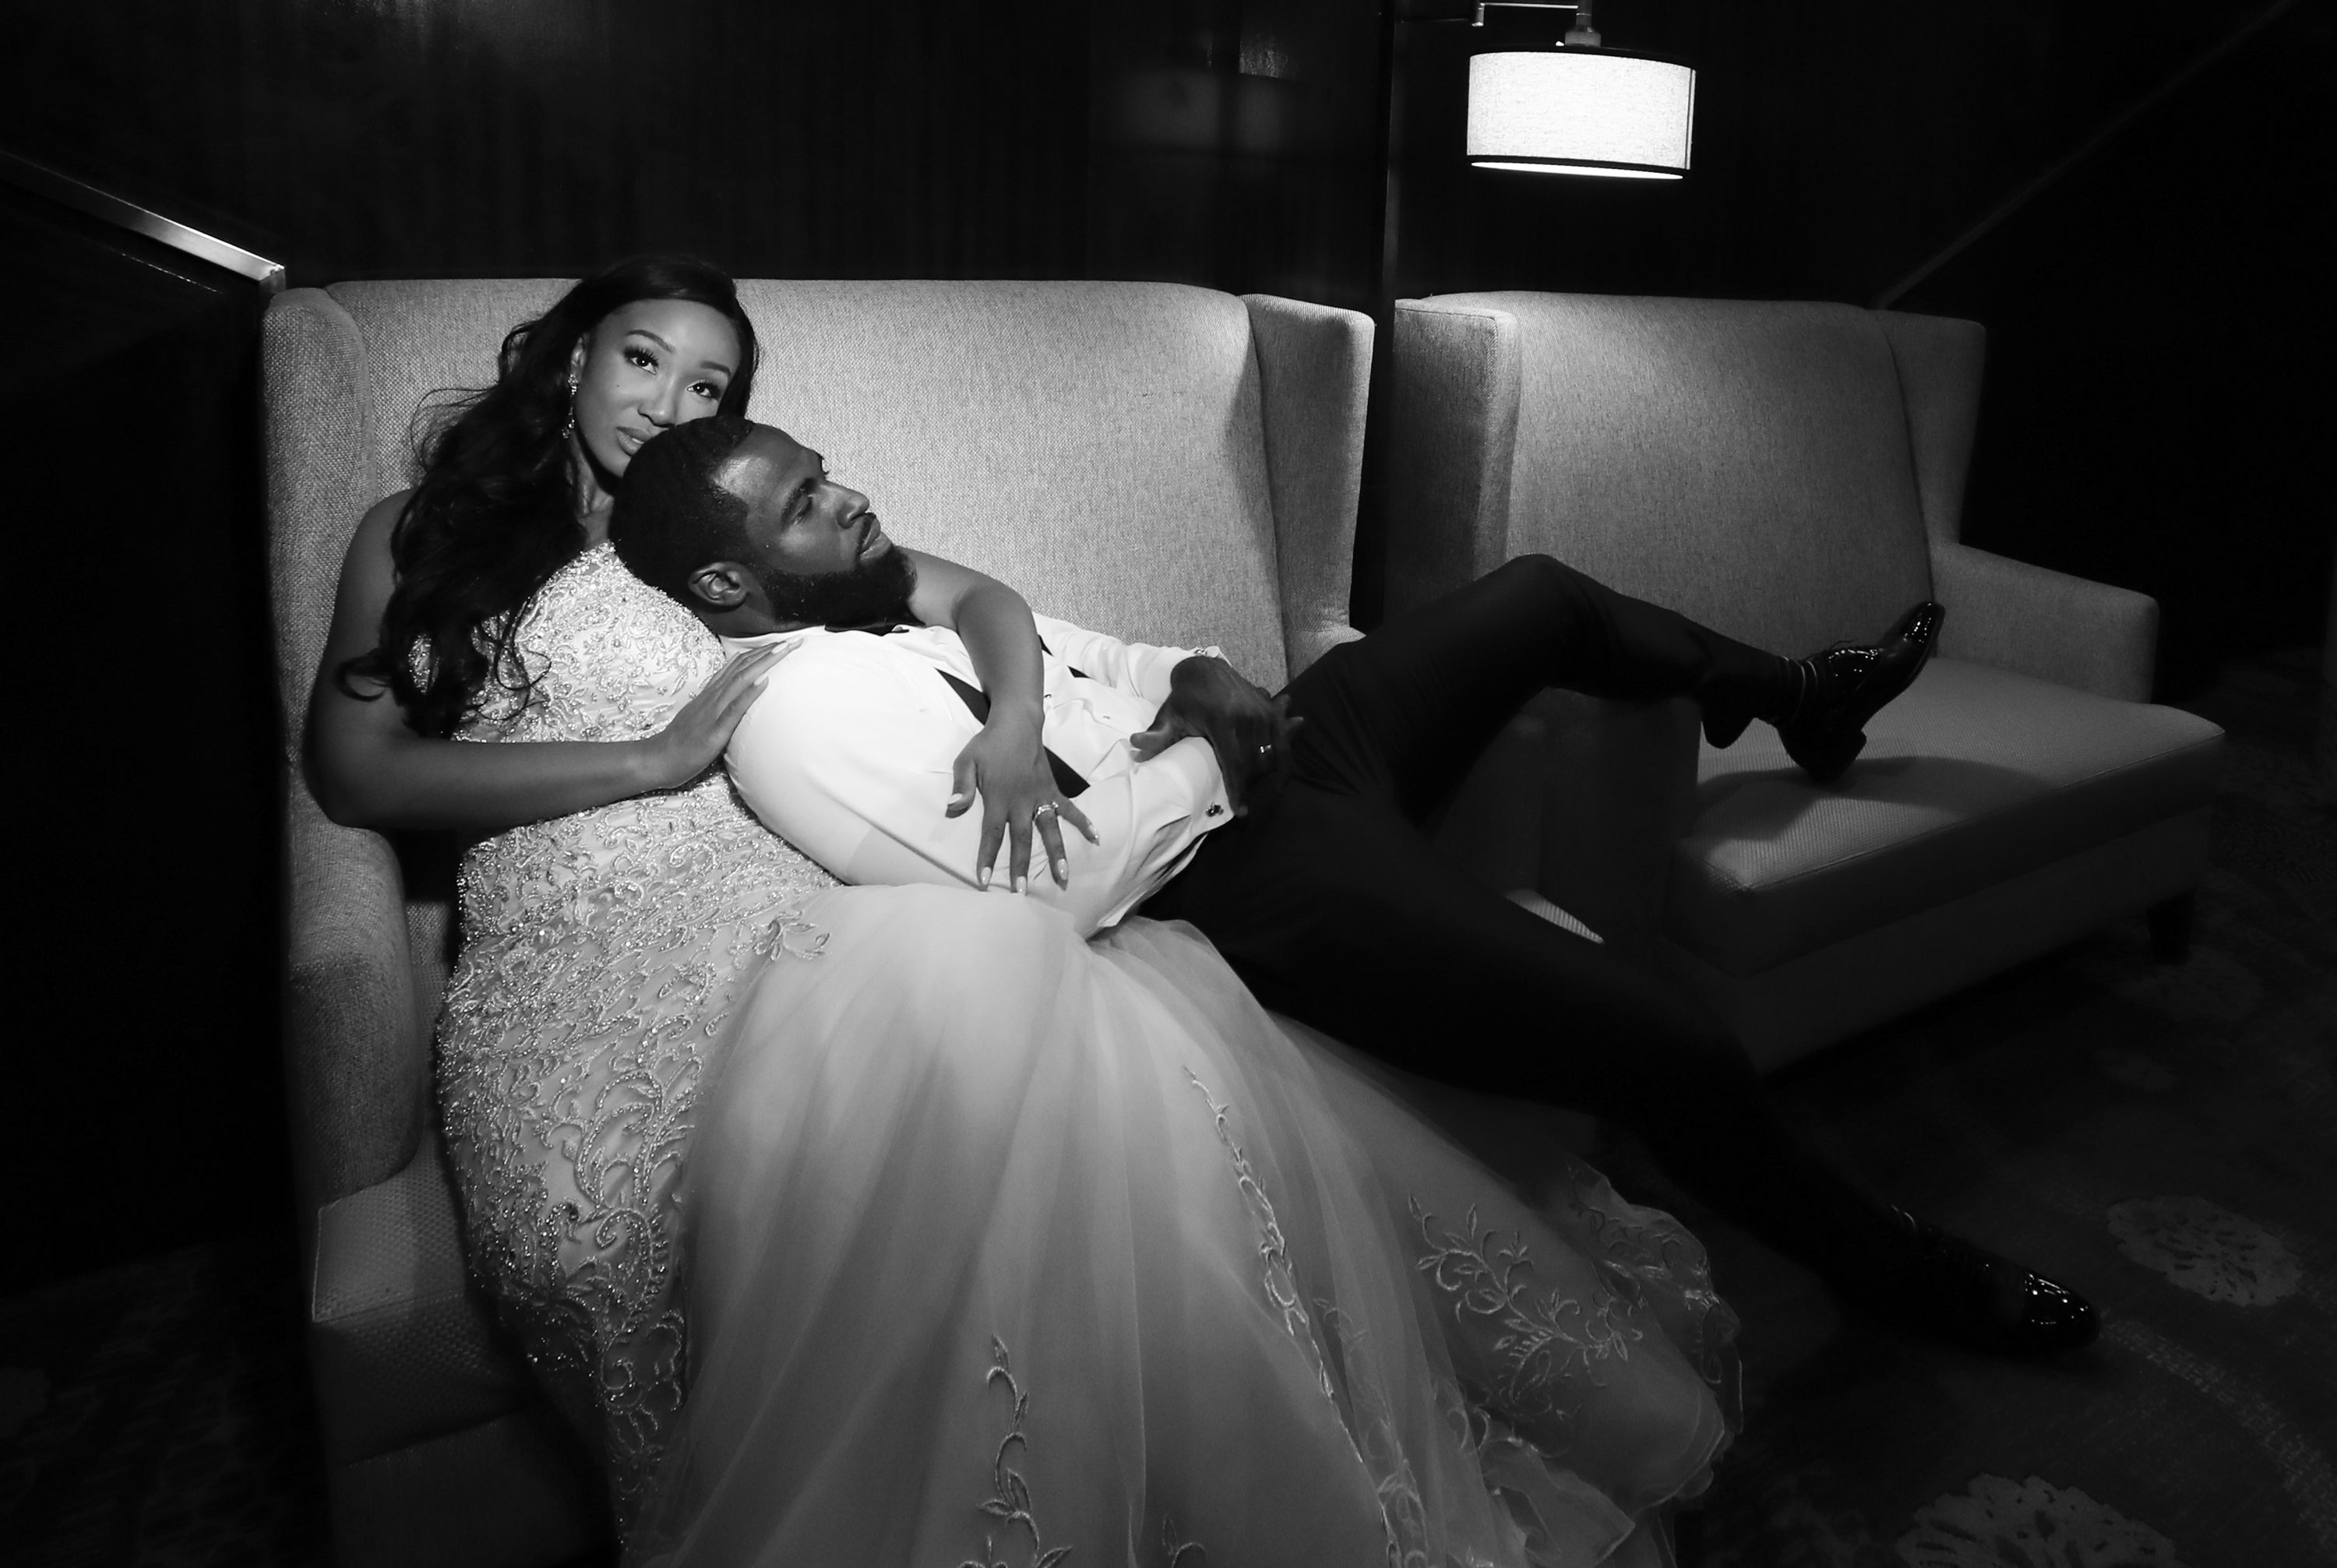 Bridal Bliss: College Sweethearts Zeb and LaToya's Regal Wedding Was Oh So Romantic
